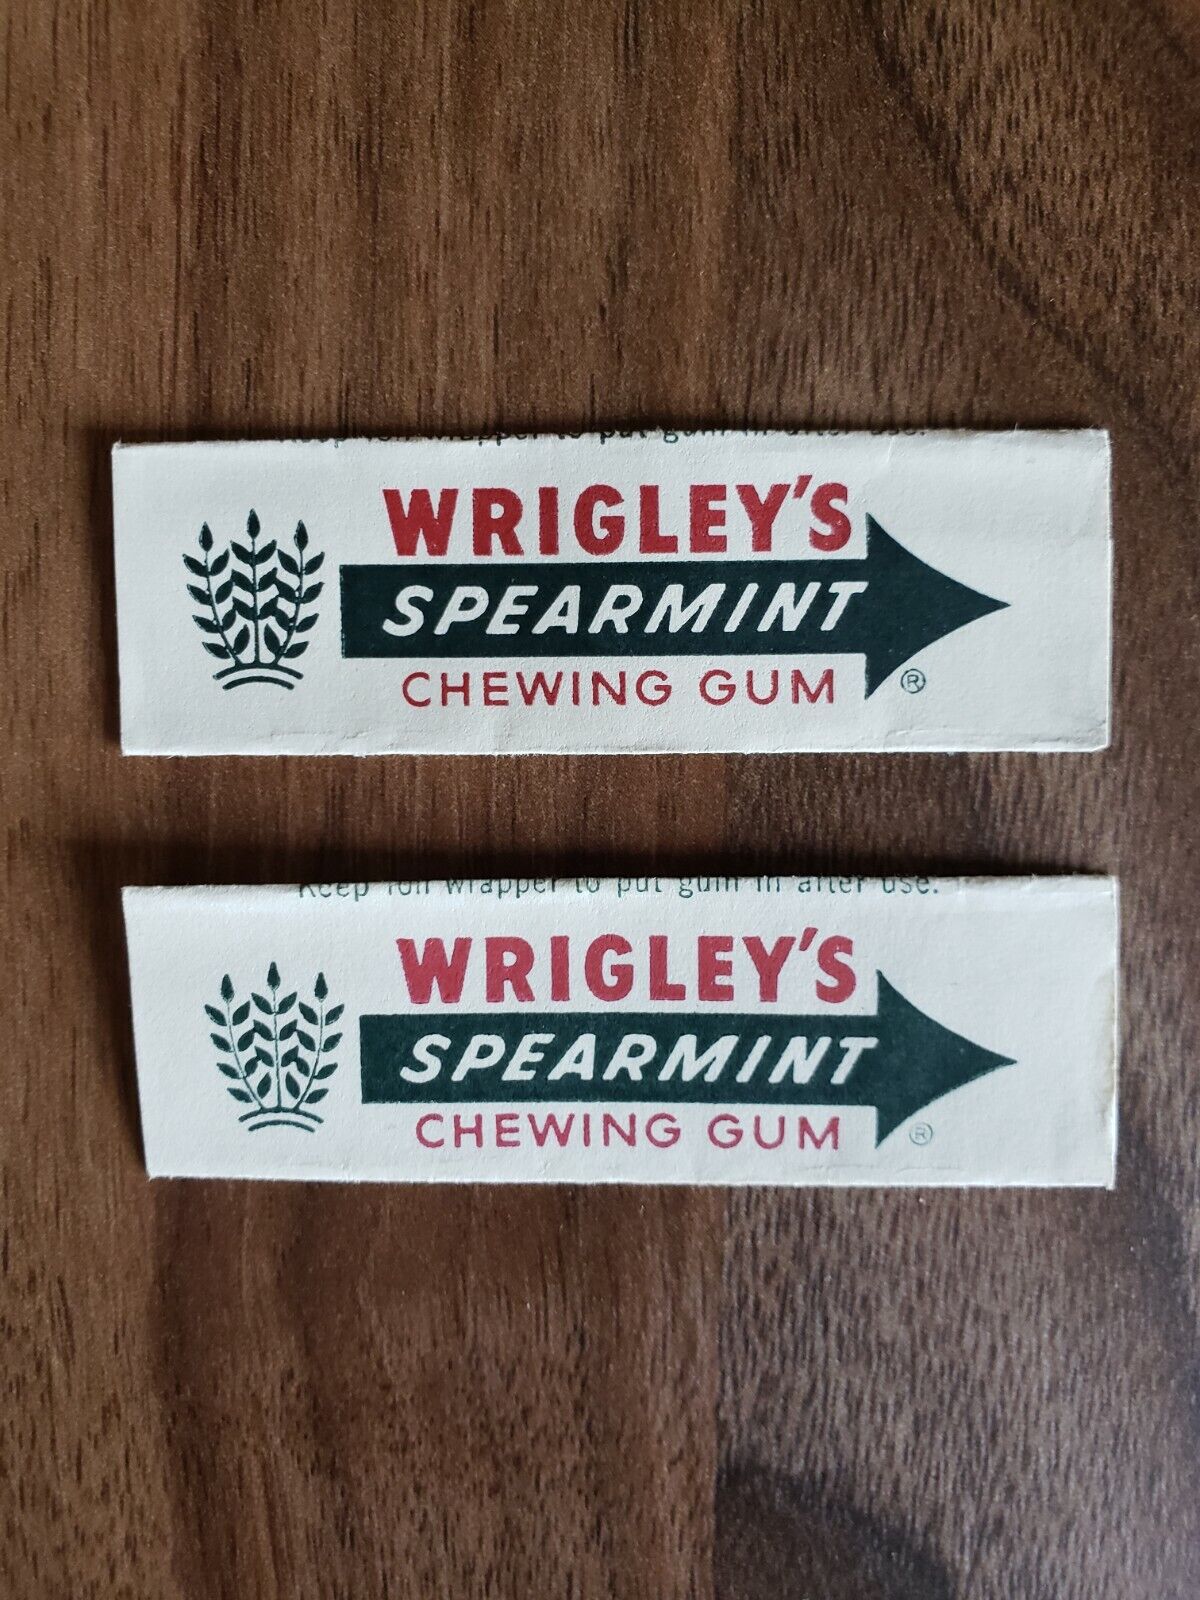 Lot of 2 vintage Wrigley's Spearmint American Chewing Gum Wrappers